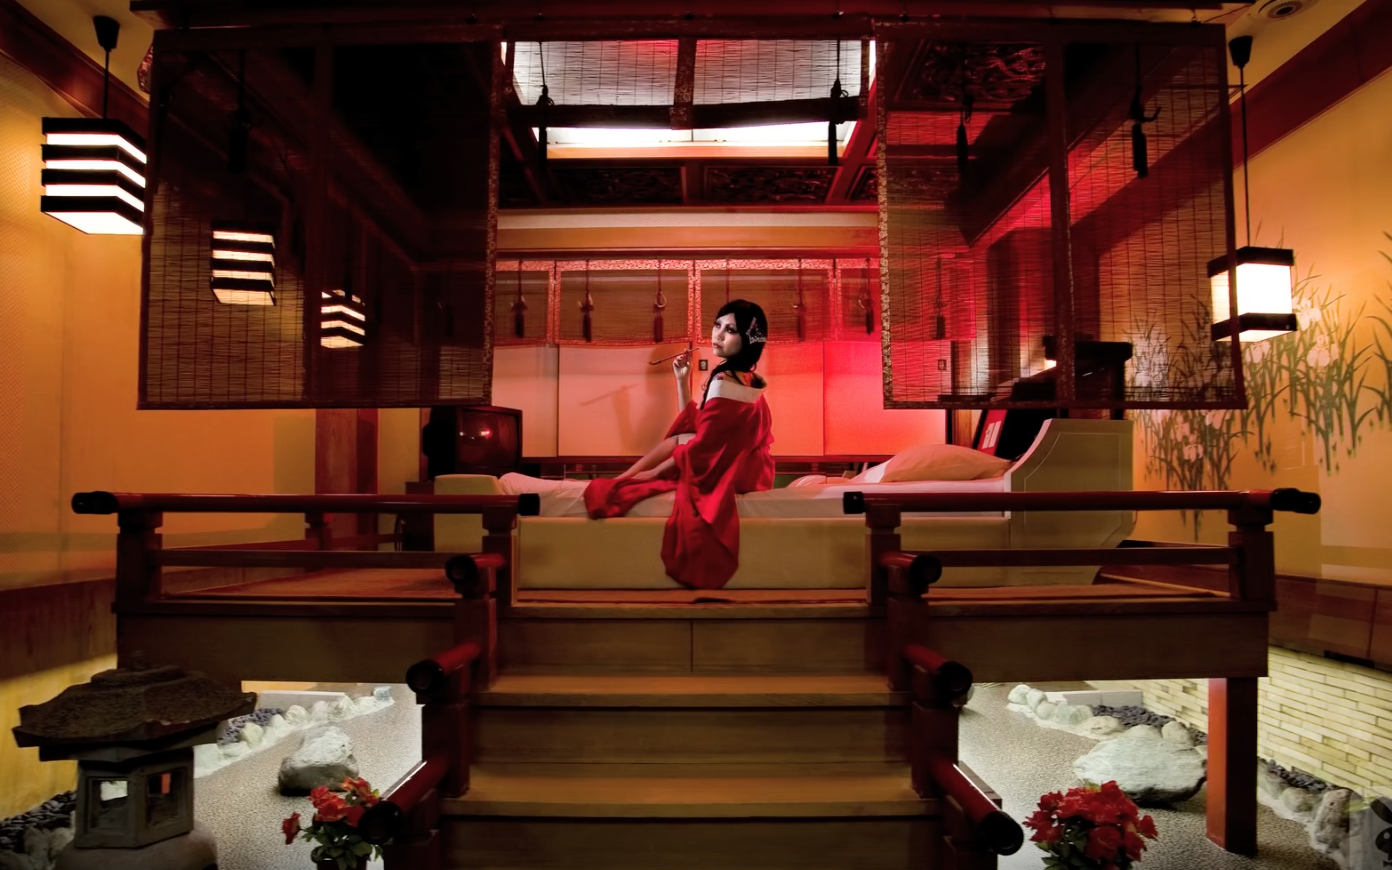 Step Back In Time With Japanese Themed Rooms At Rare Vintage Love Hotel In Osaka【video